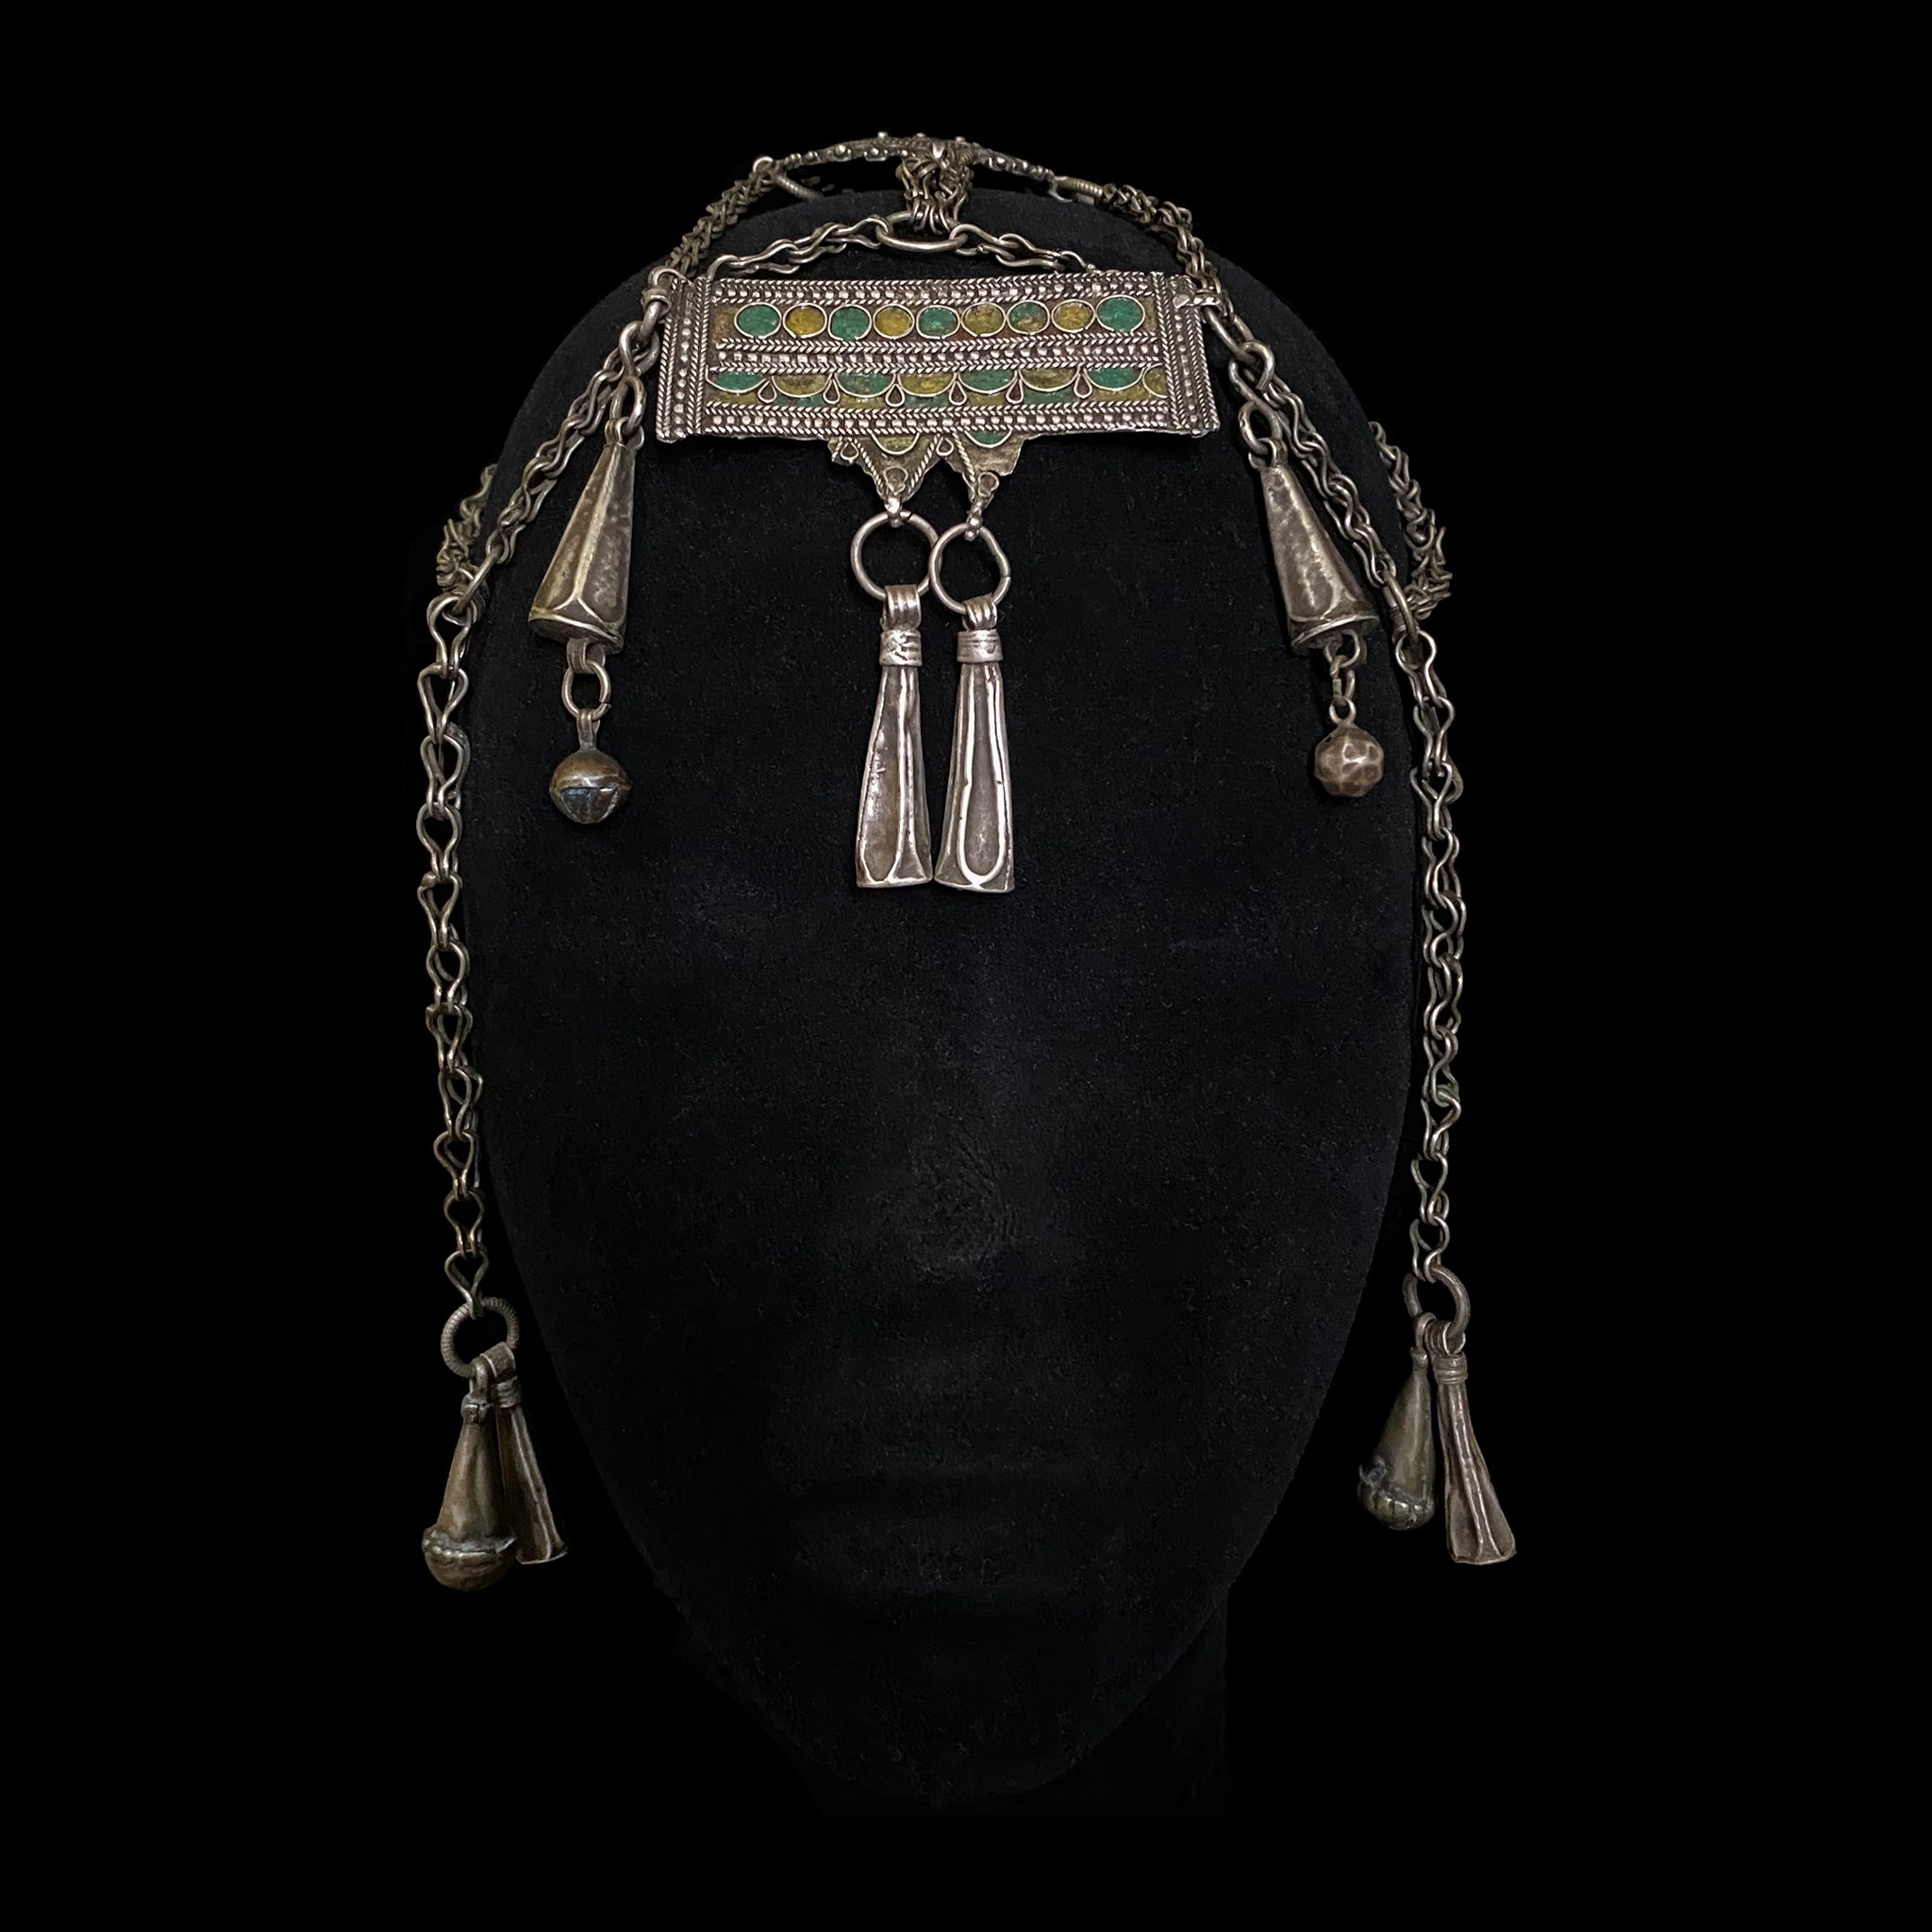 Very Rare Antique Headdress from Ighil N’Ogho, Taliouine, Morocco